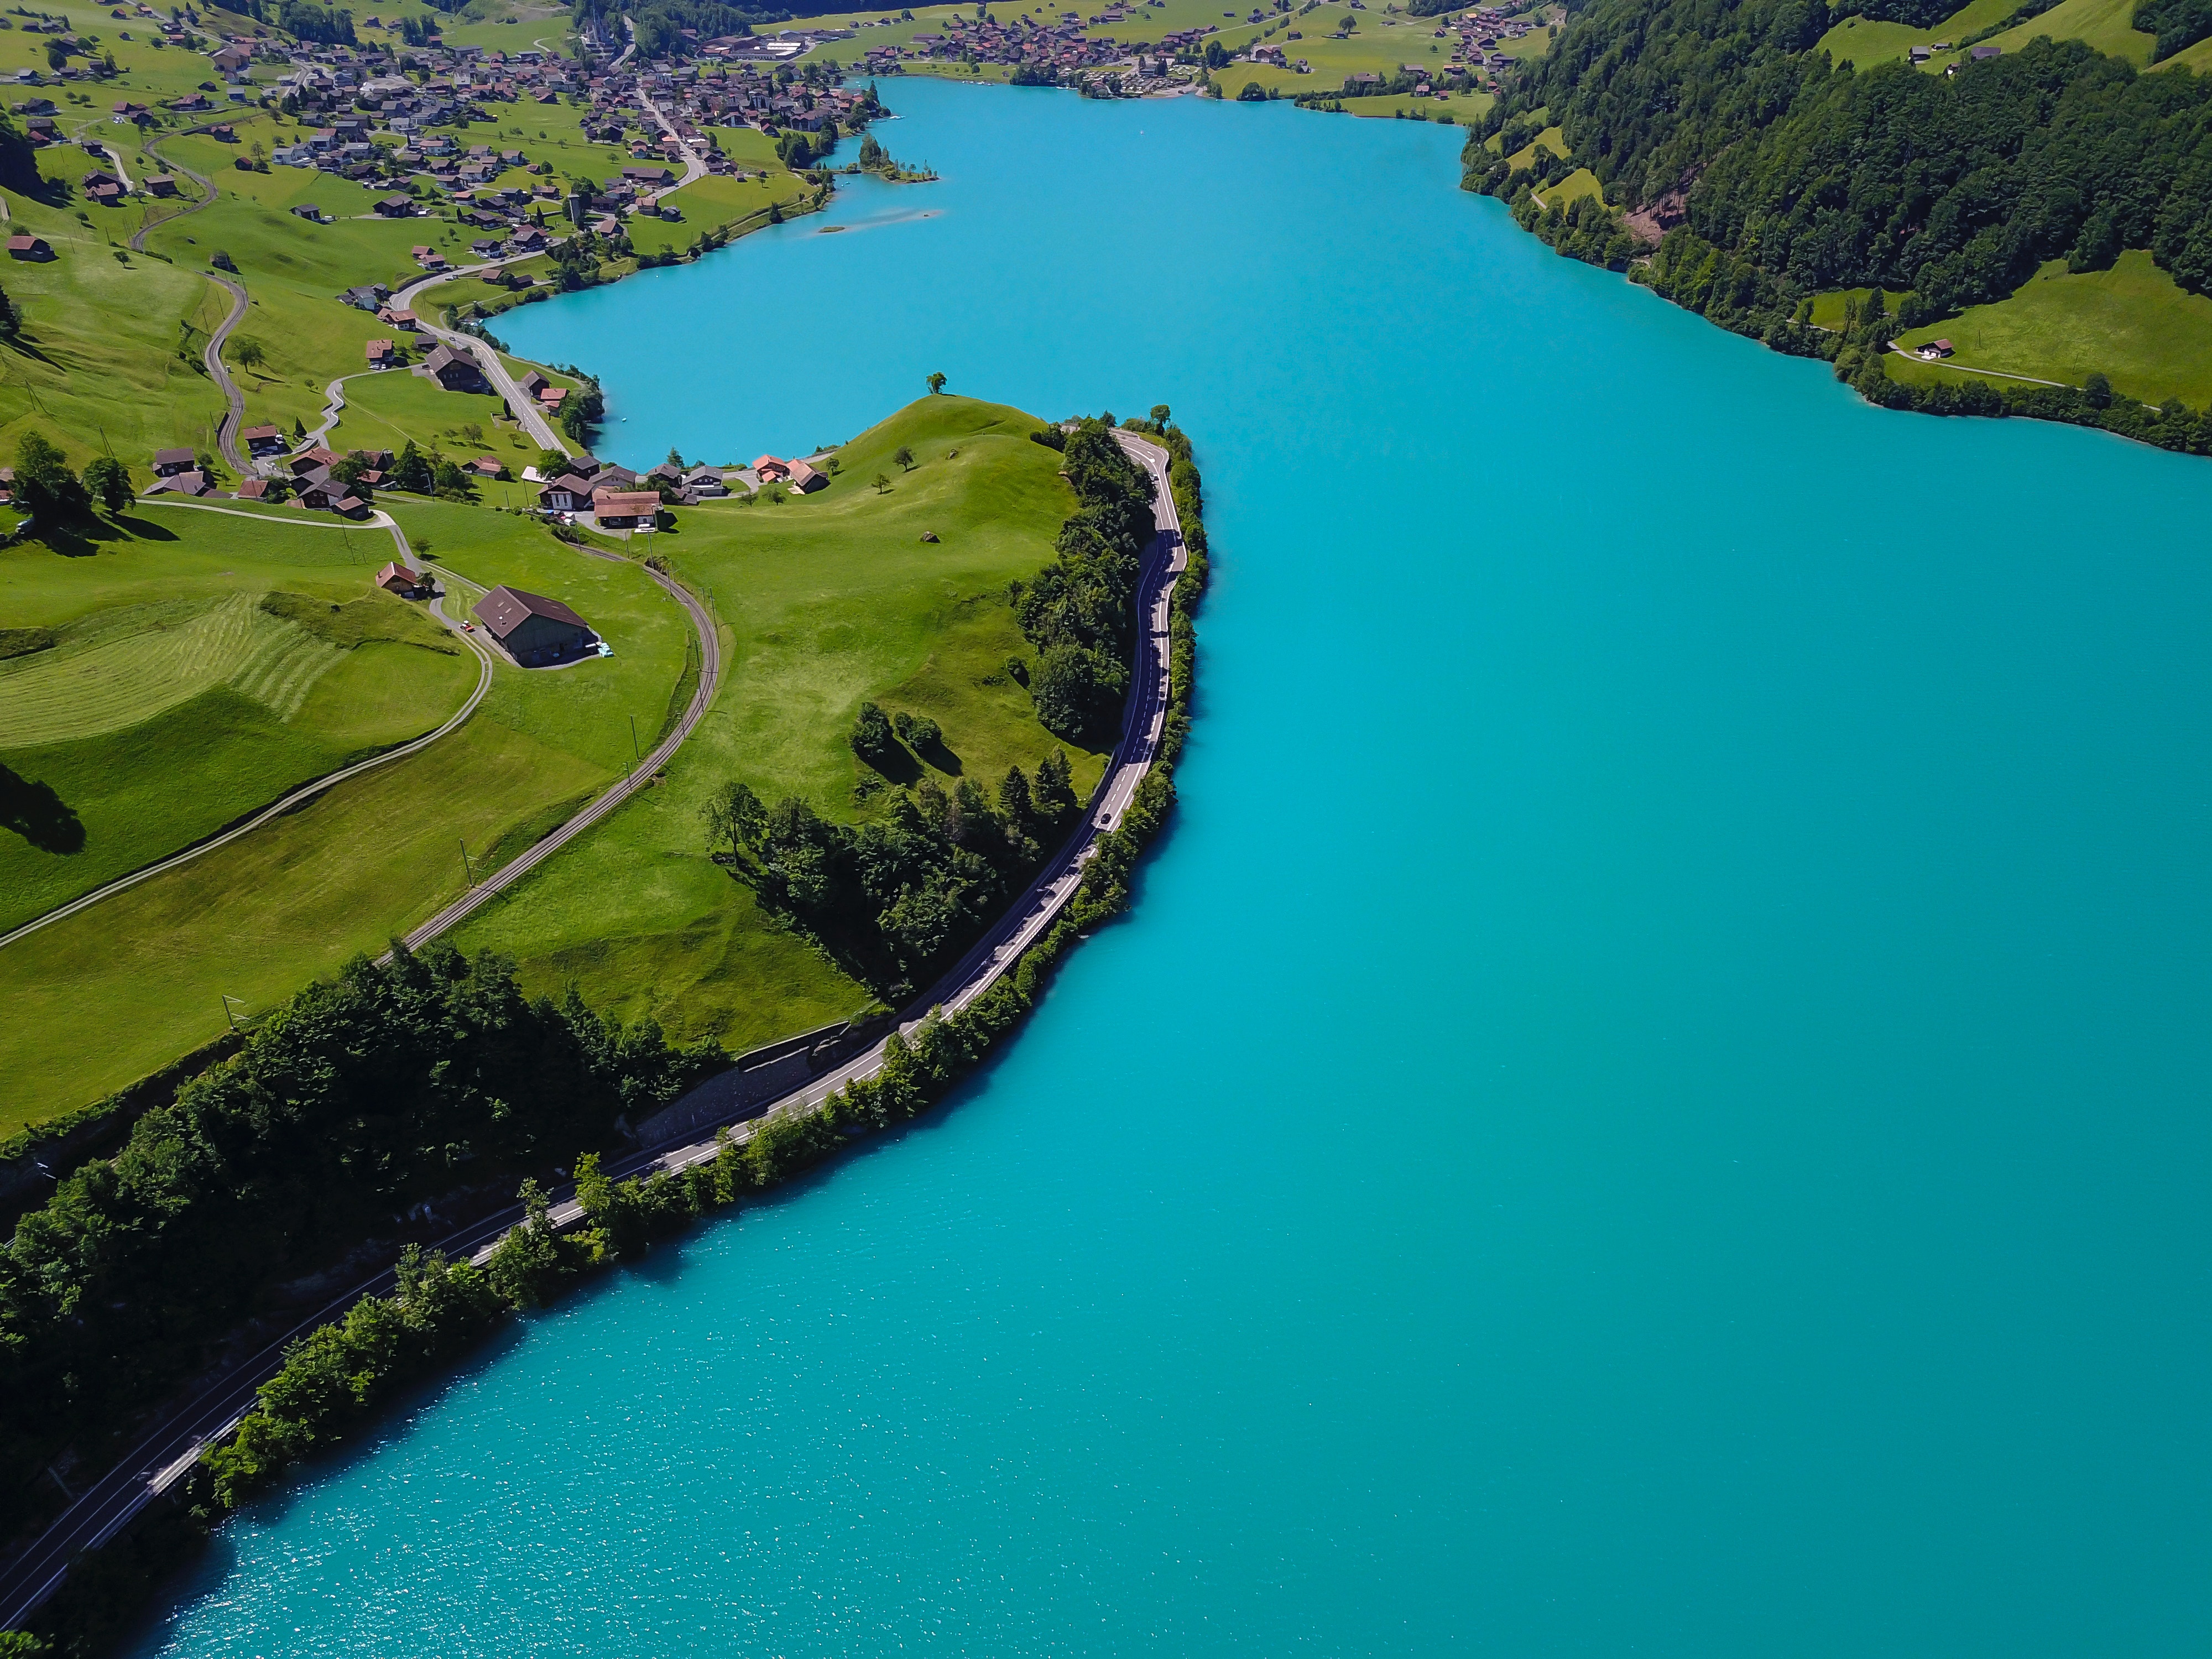 Switzerland, Blue, Water, Road, Trees, Lake, Aerial view Wallpapers HD